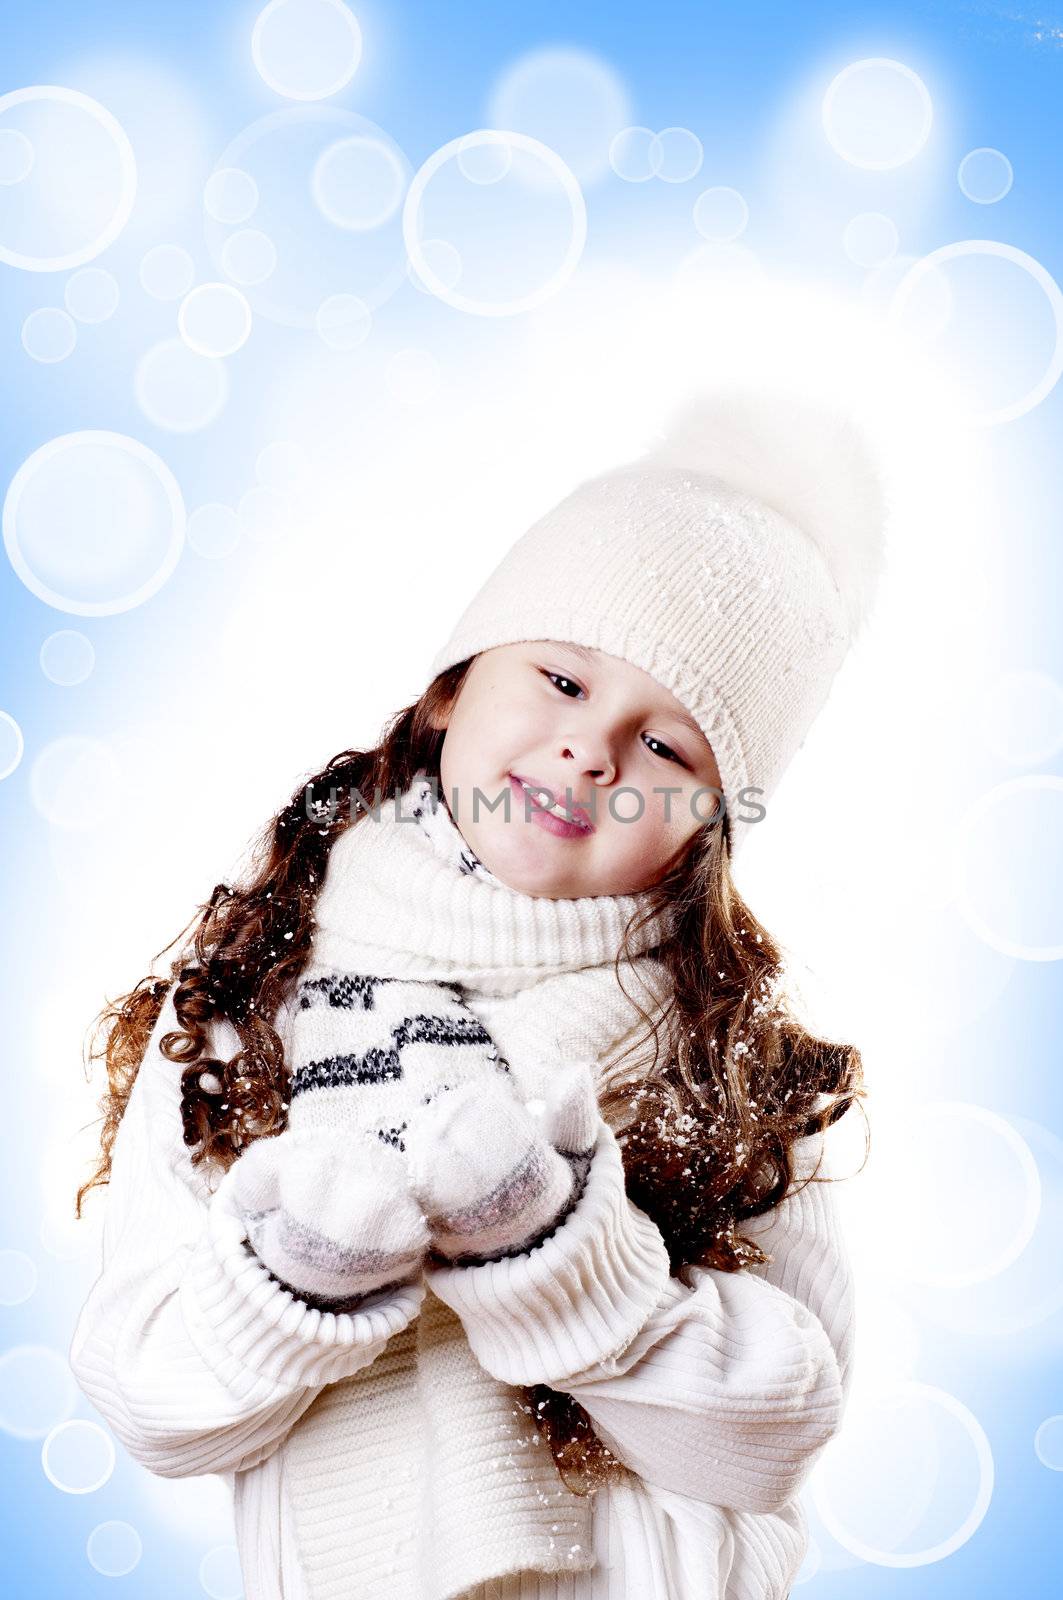 Winter Pleasant Girl abstract white and blue background